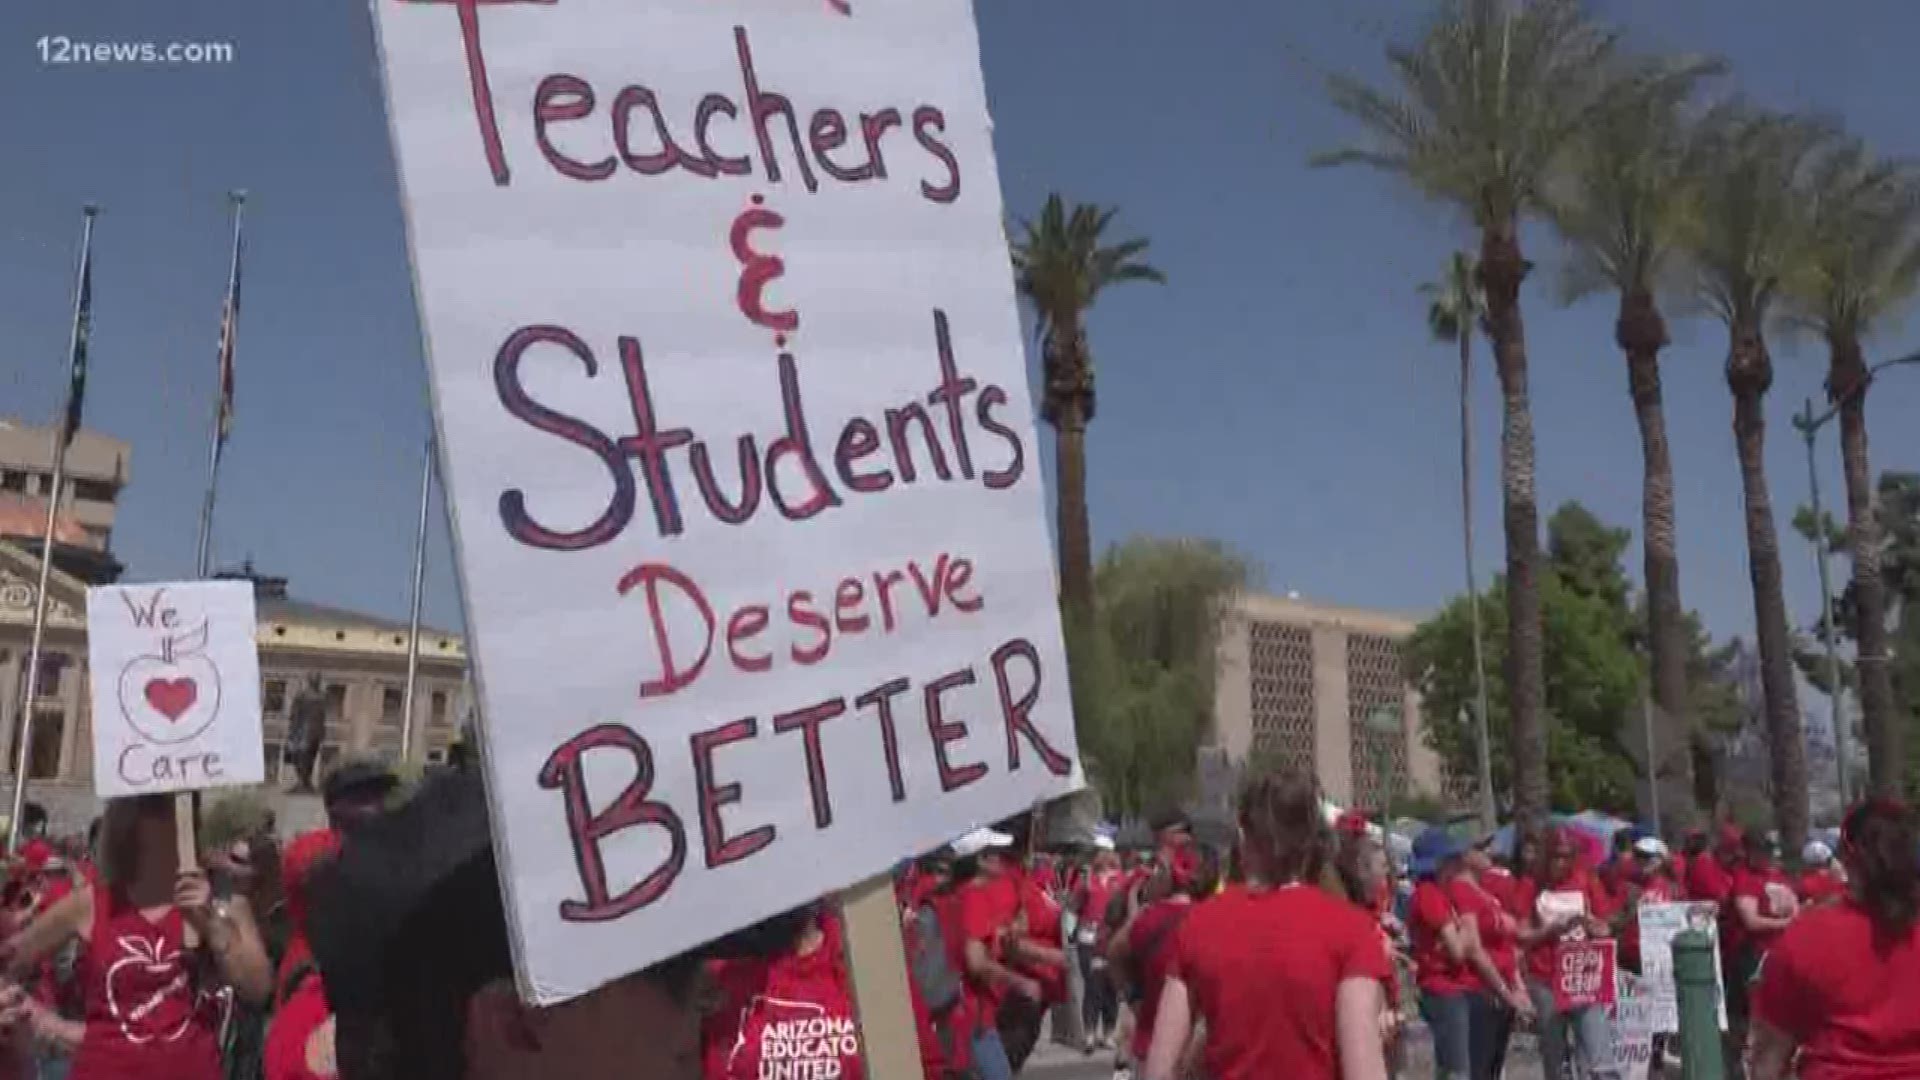 Walkout leaders said educators will return to the classrooms after lawmakers pass a budget proposal.